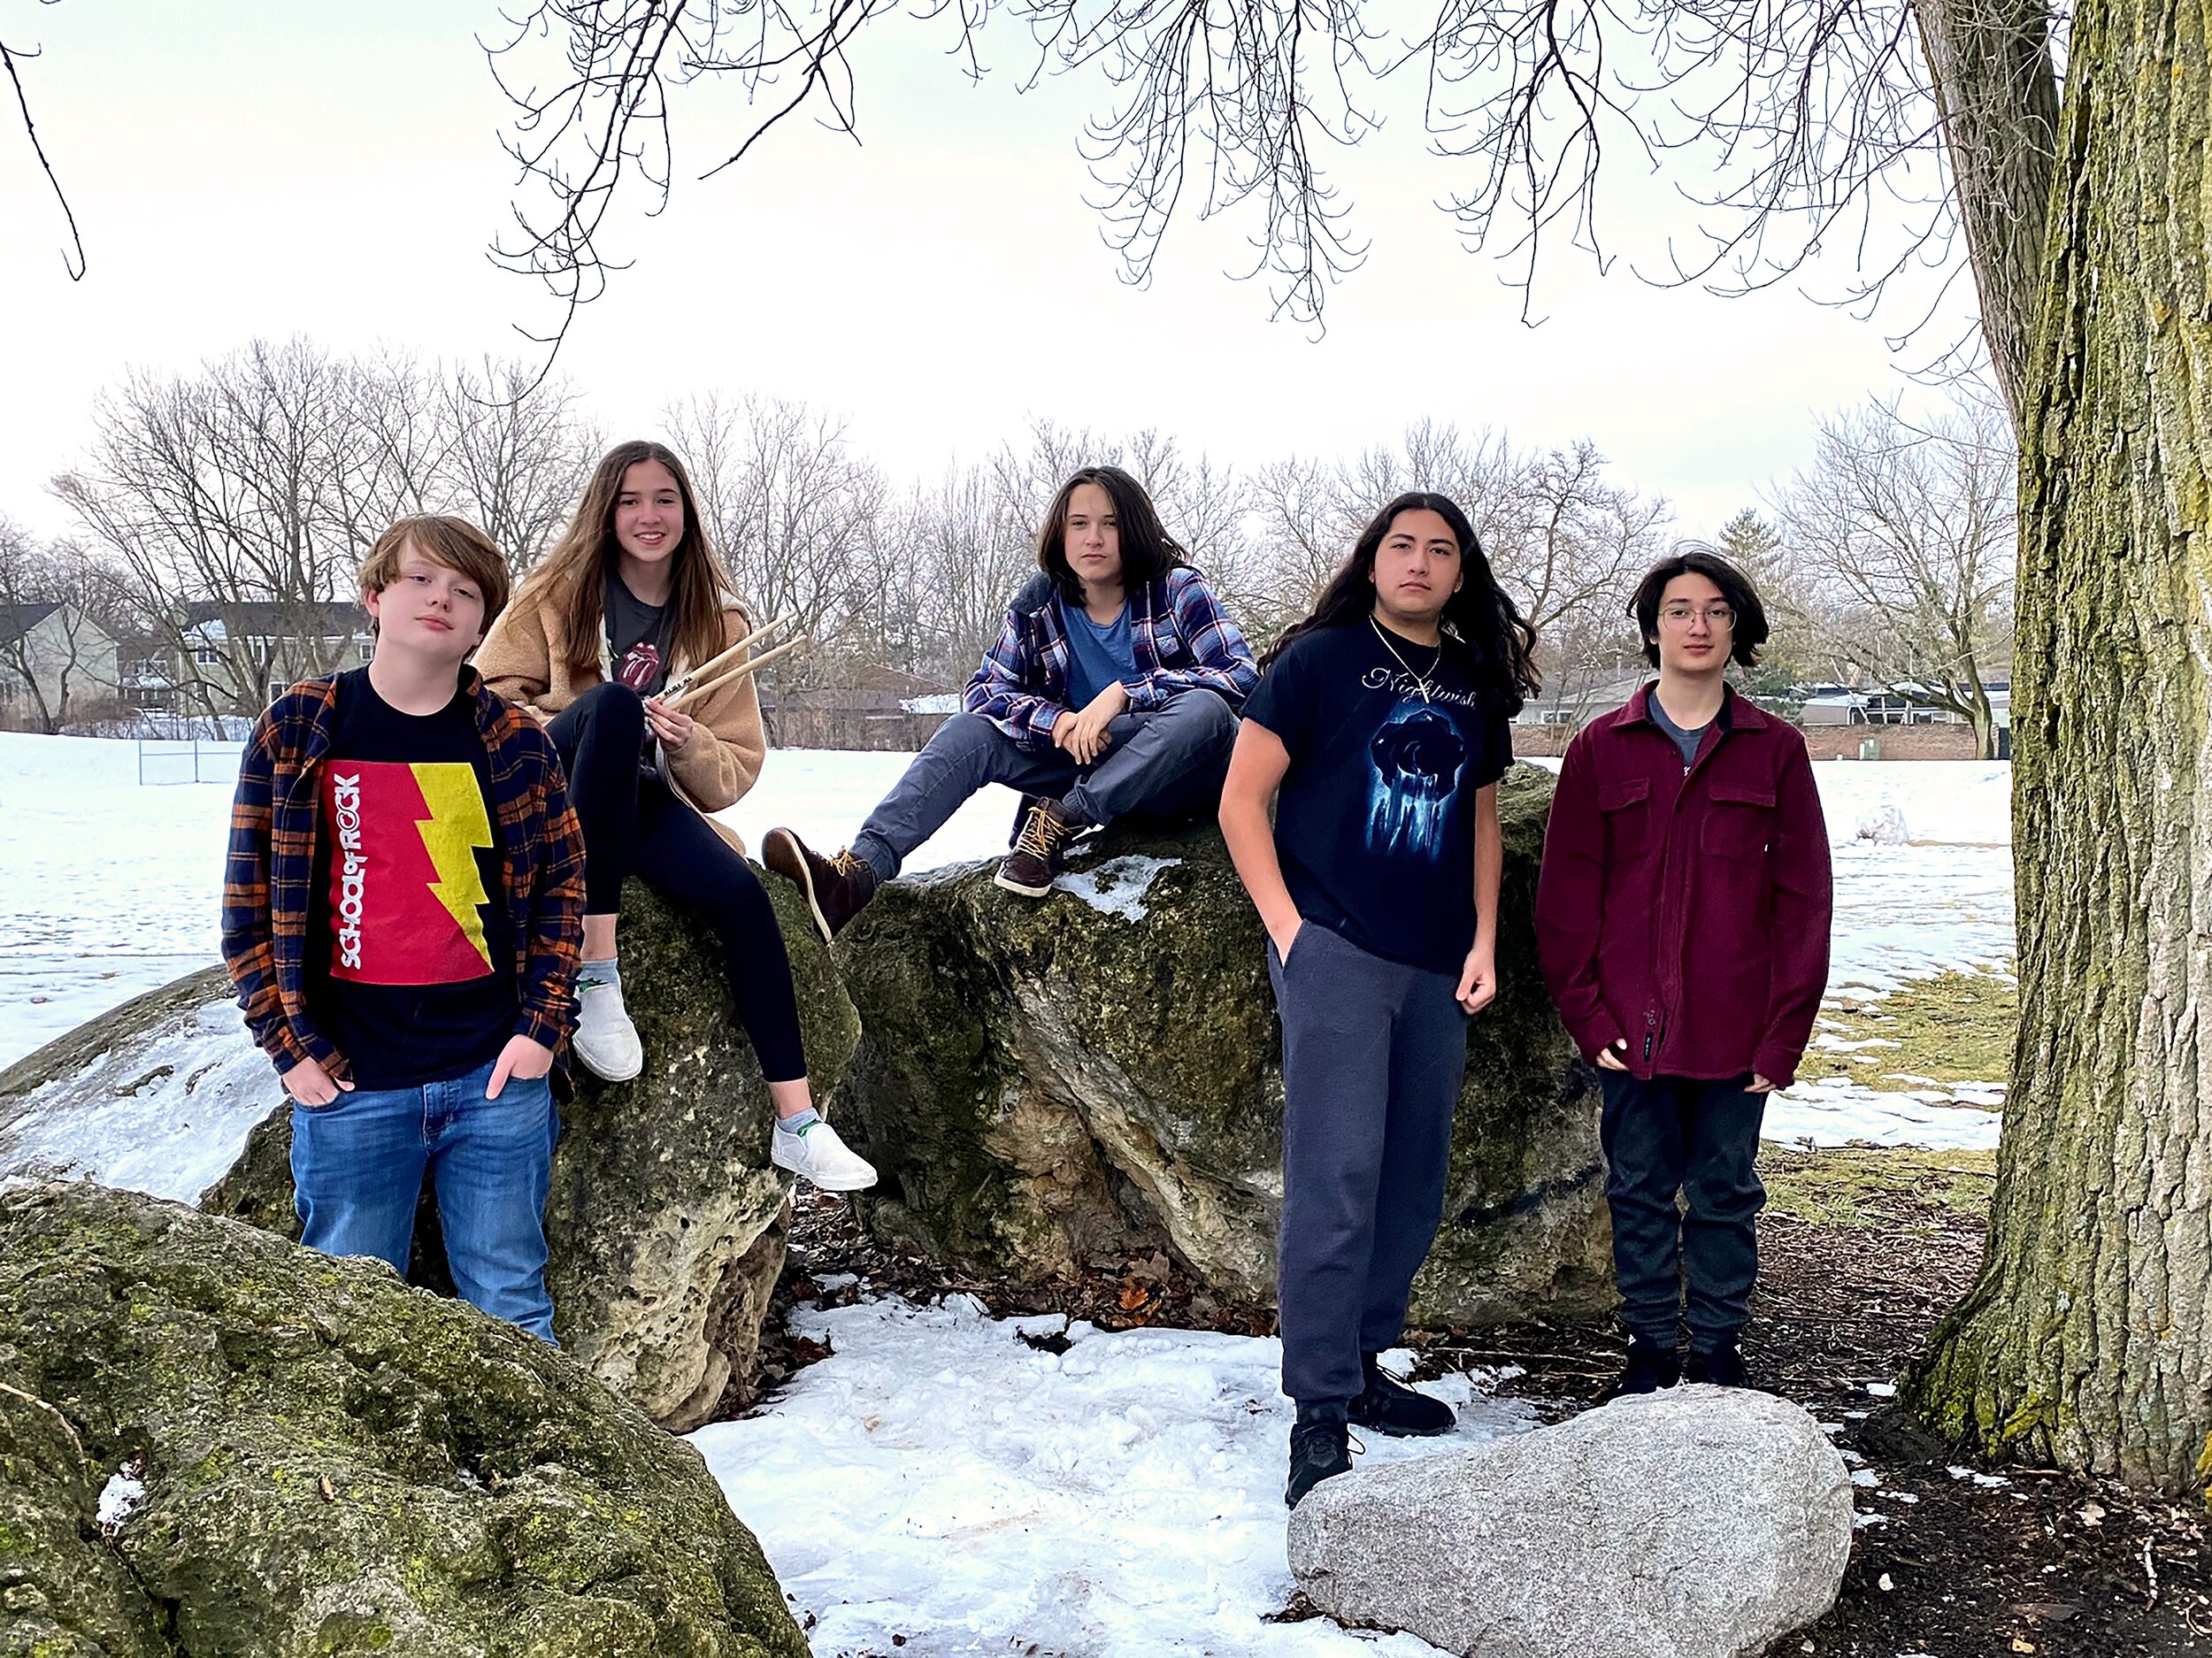  After the main competition,  Acacia  will bring us home with a live set of their own! Acacia is a mixed-genre rock band from the western suburbs of Chicago. Though all but the singer just graduated middle school, much of their influence comes from o